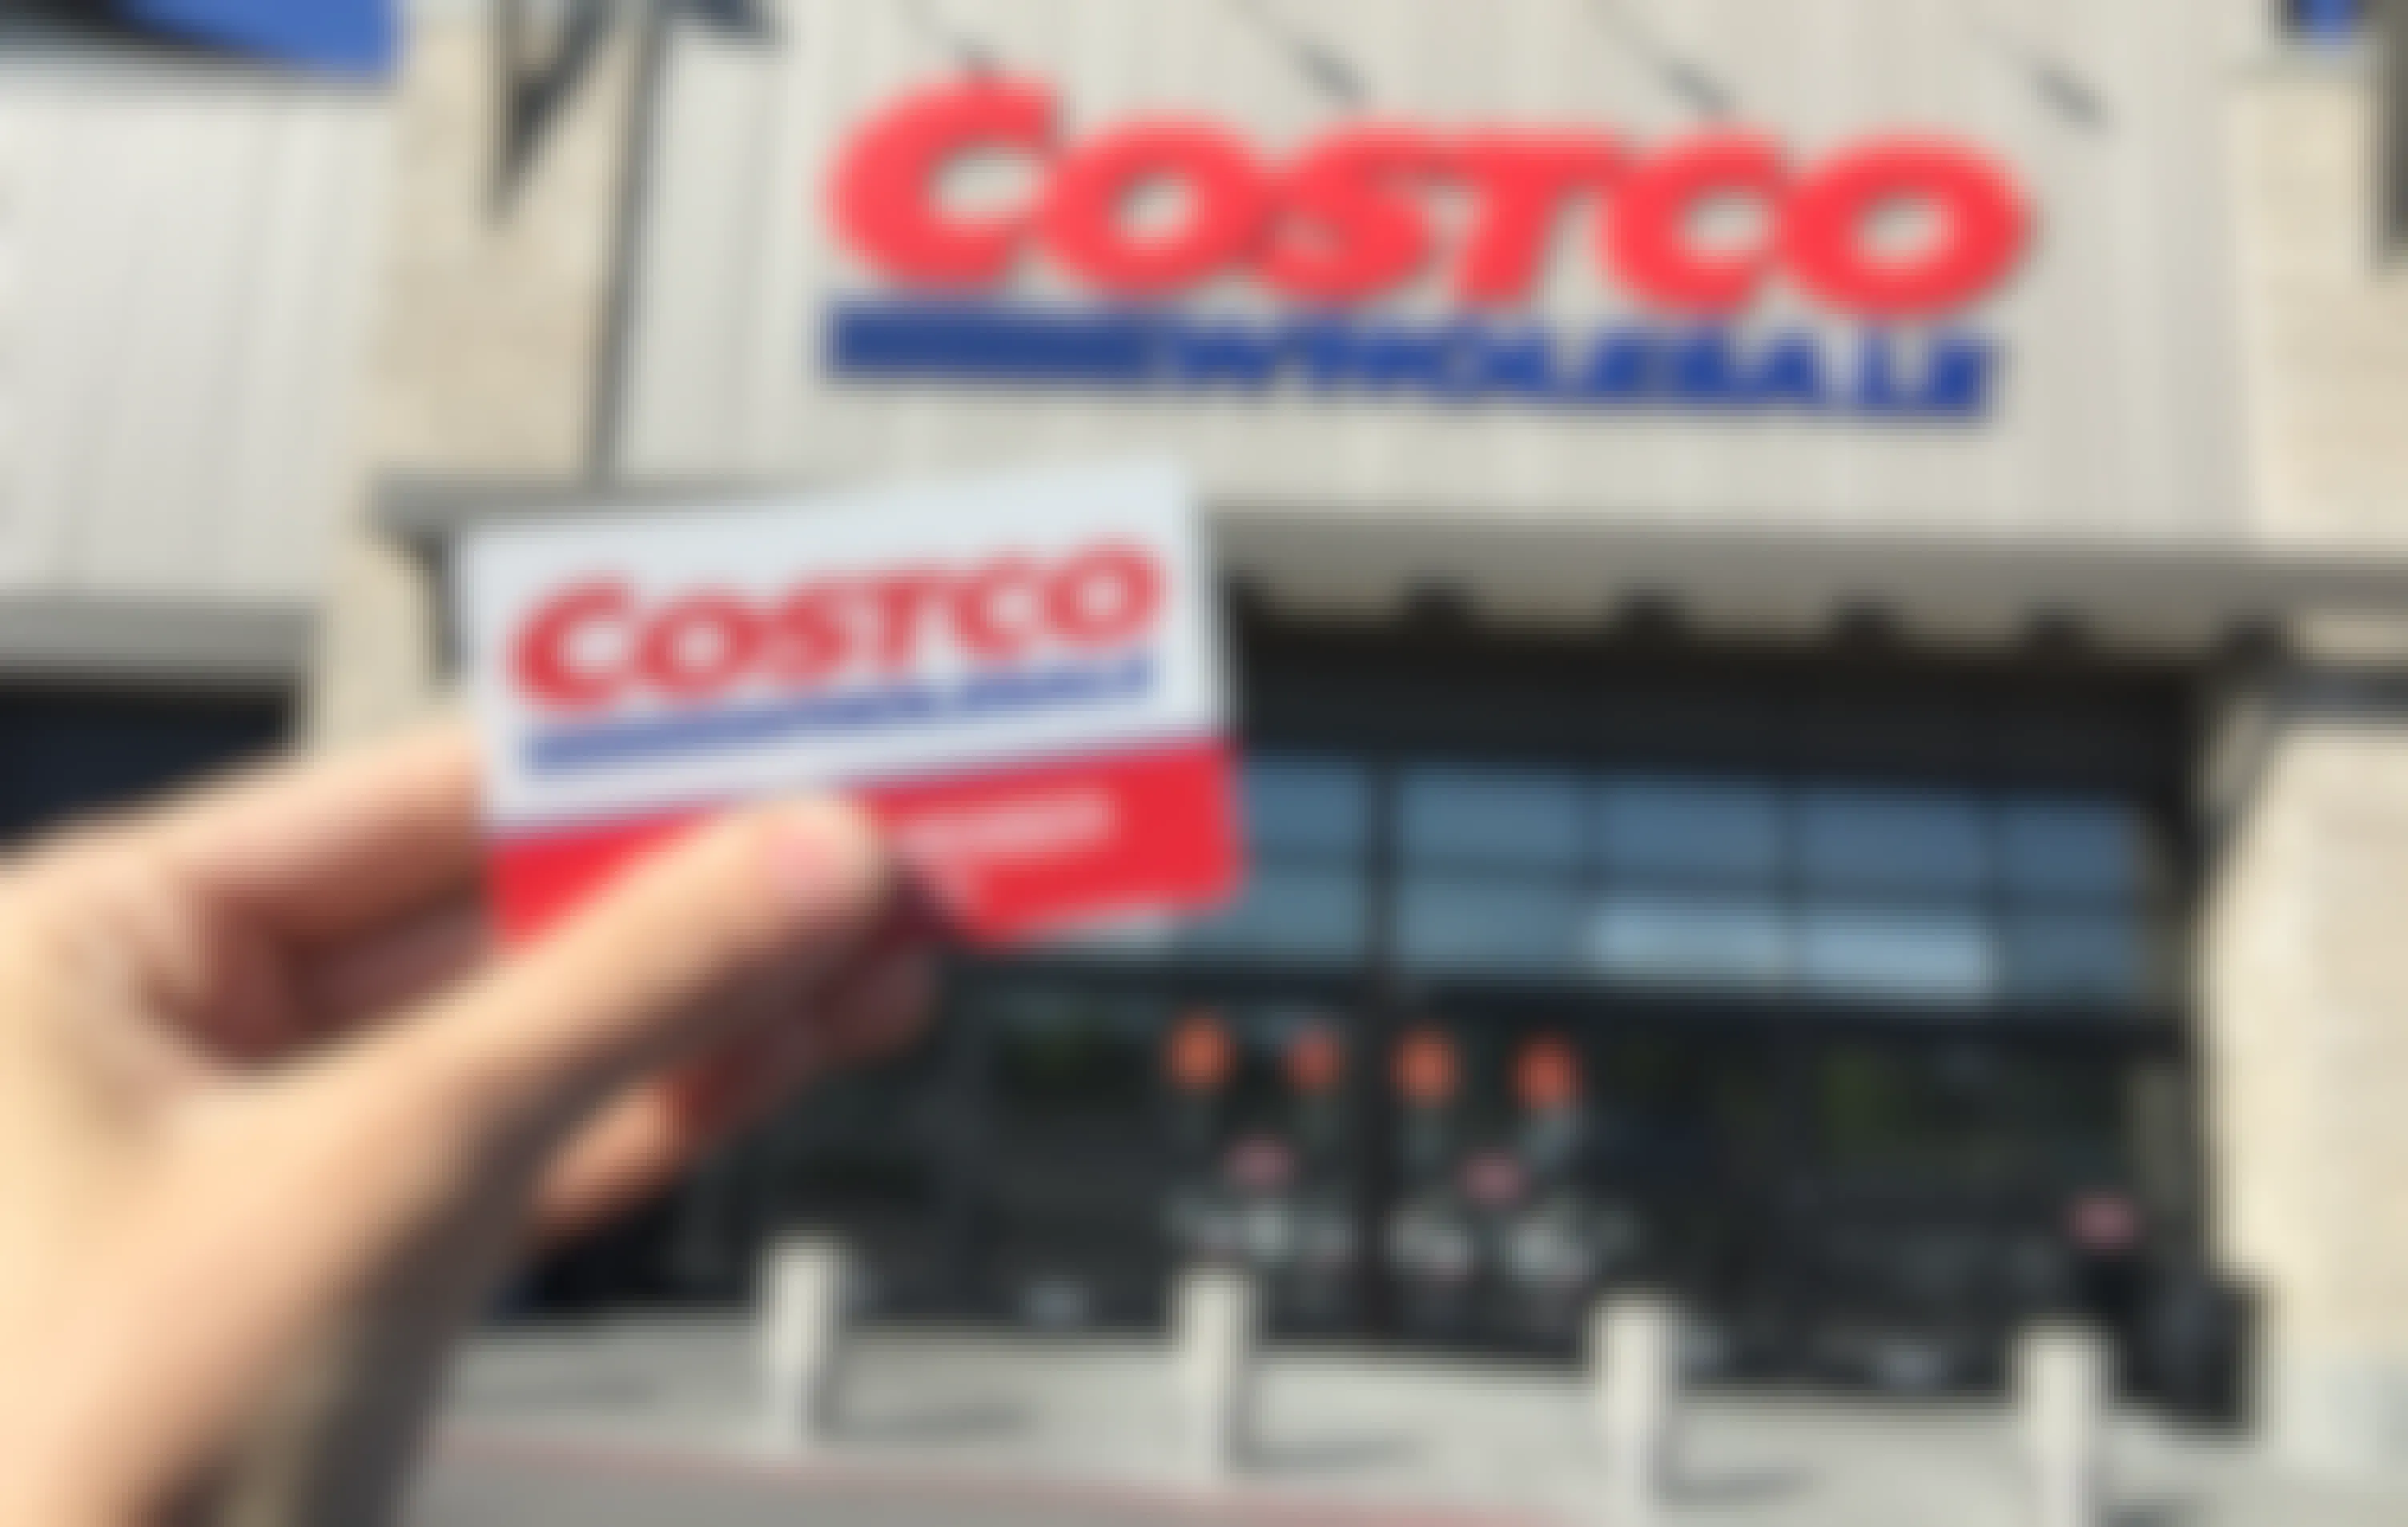 Is Costco Raising Membership Fees? Not Just Yet, But It's Coming...